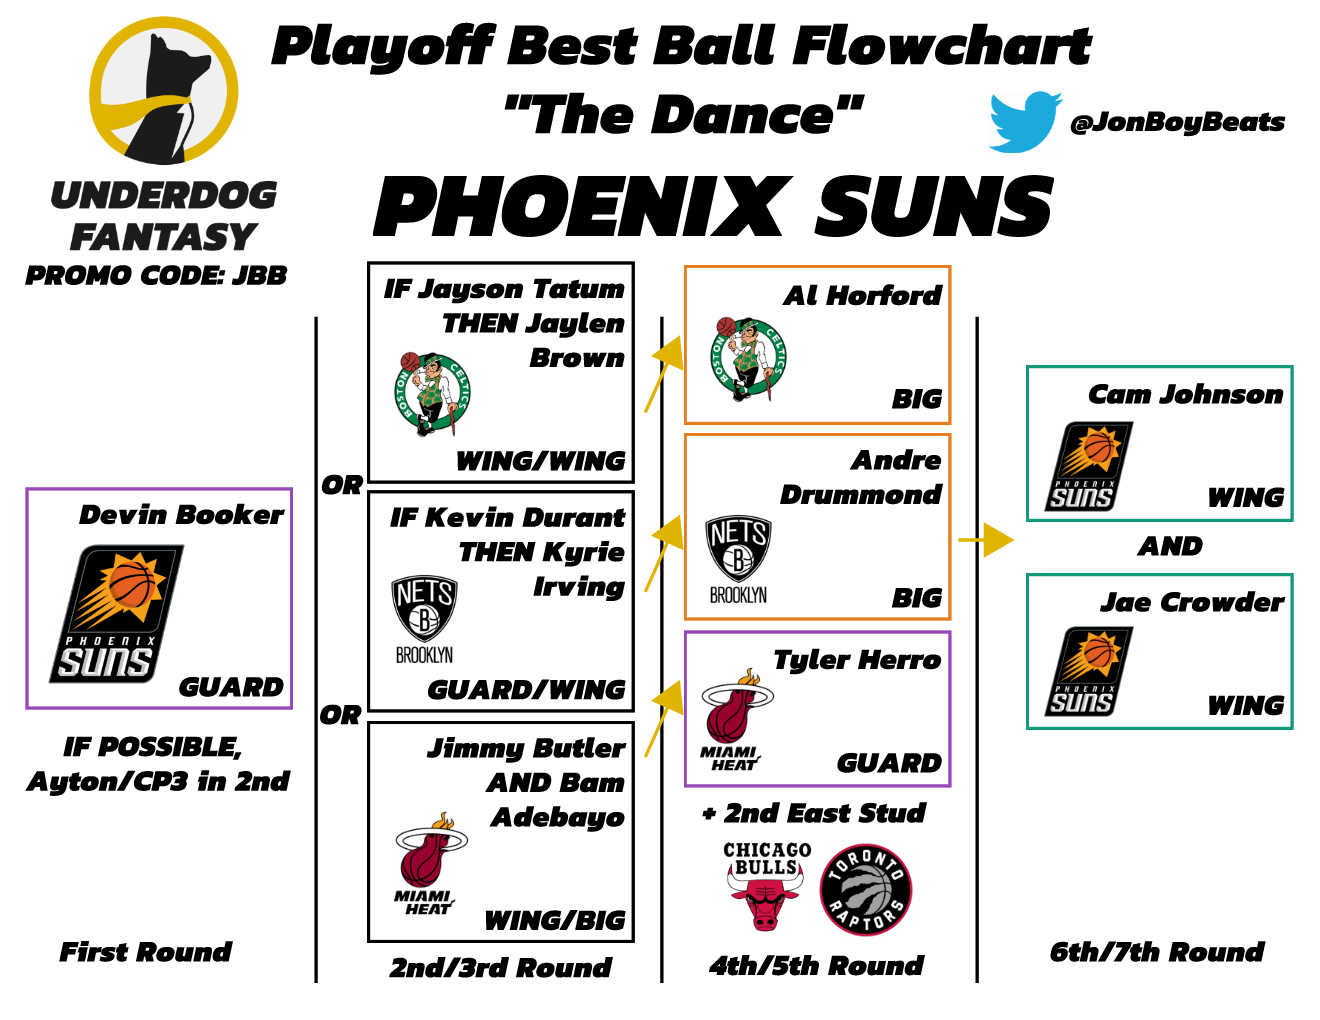 How to Play NBA Playoff Best Ball on Underdog Fantasy